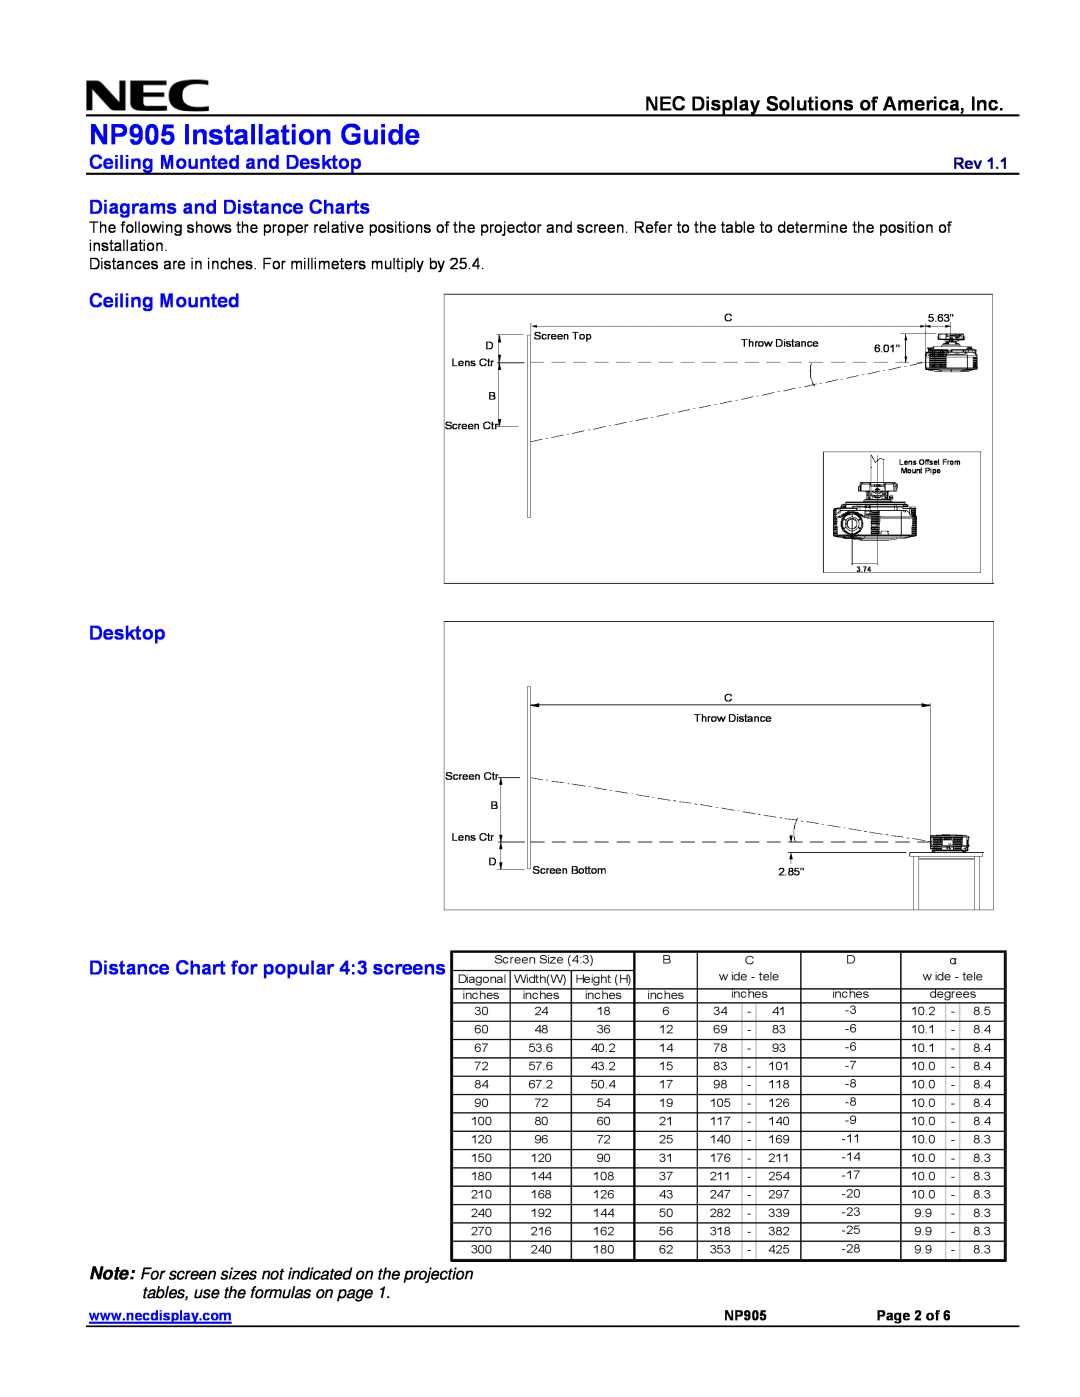 NEC NP905 NEC Display Solutions of America, Inc, Diagrams and Distance Charts, Ceiling Mounted, Desktop, Page 2 of 